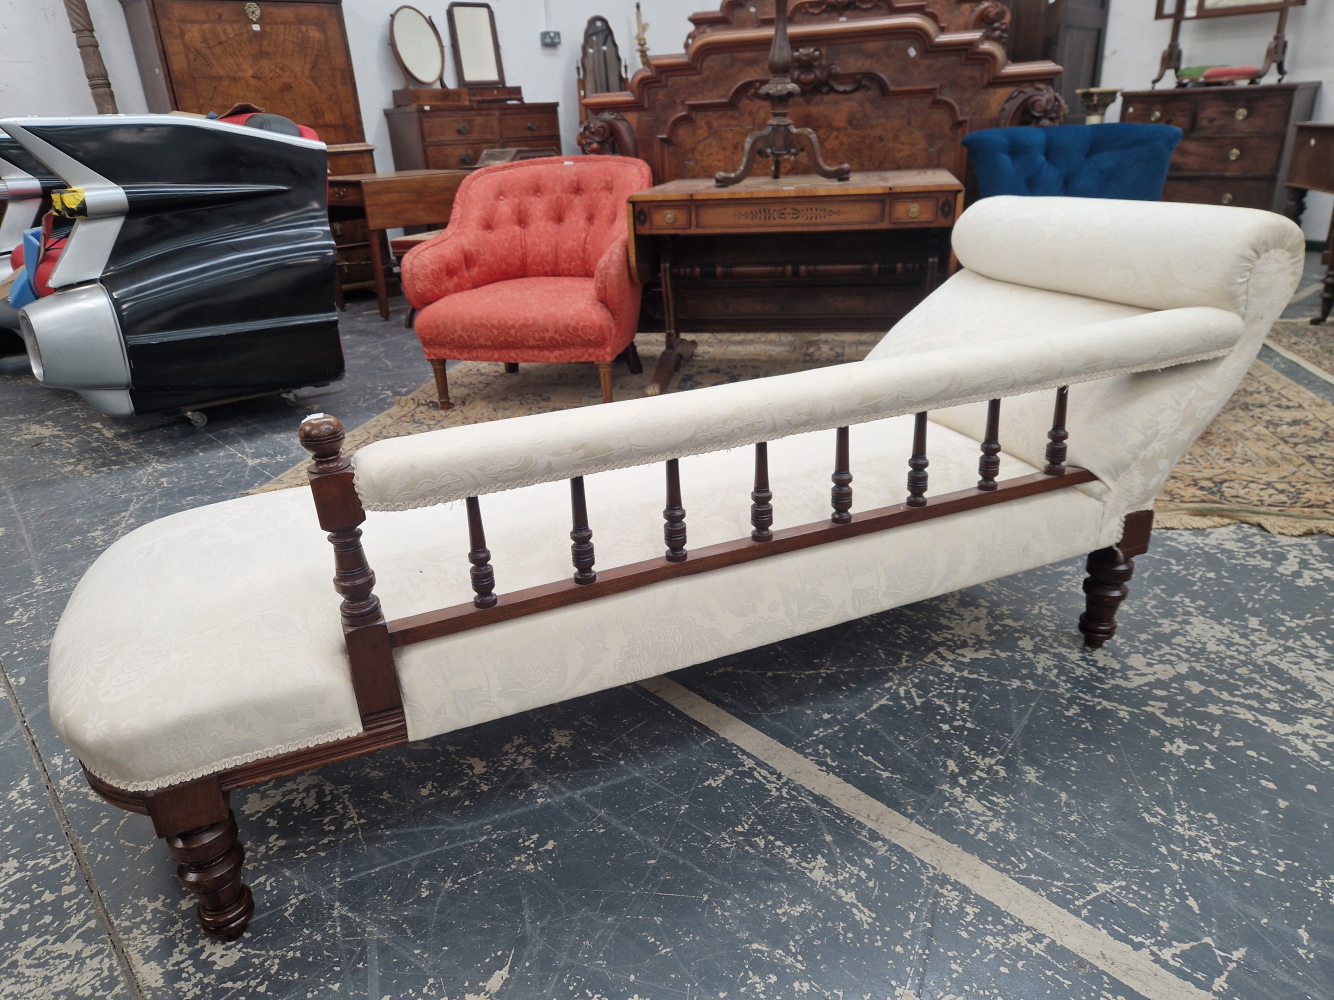 AN EARLY 20th C. MAHOGANY CHAISE LONGUE UPHOLSTERED IN WHITE DAMASK, ONE LONG SIDE WITH A BALUSTRADE - Image 6 of 6